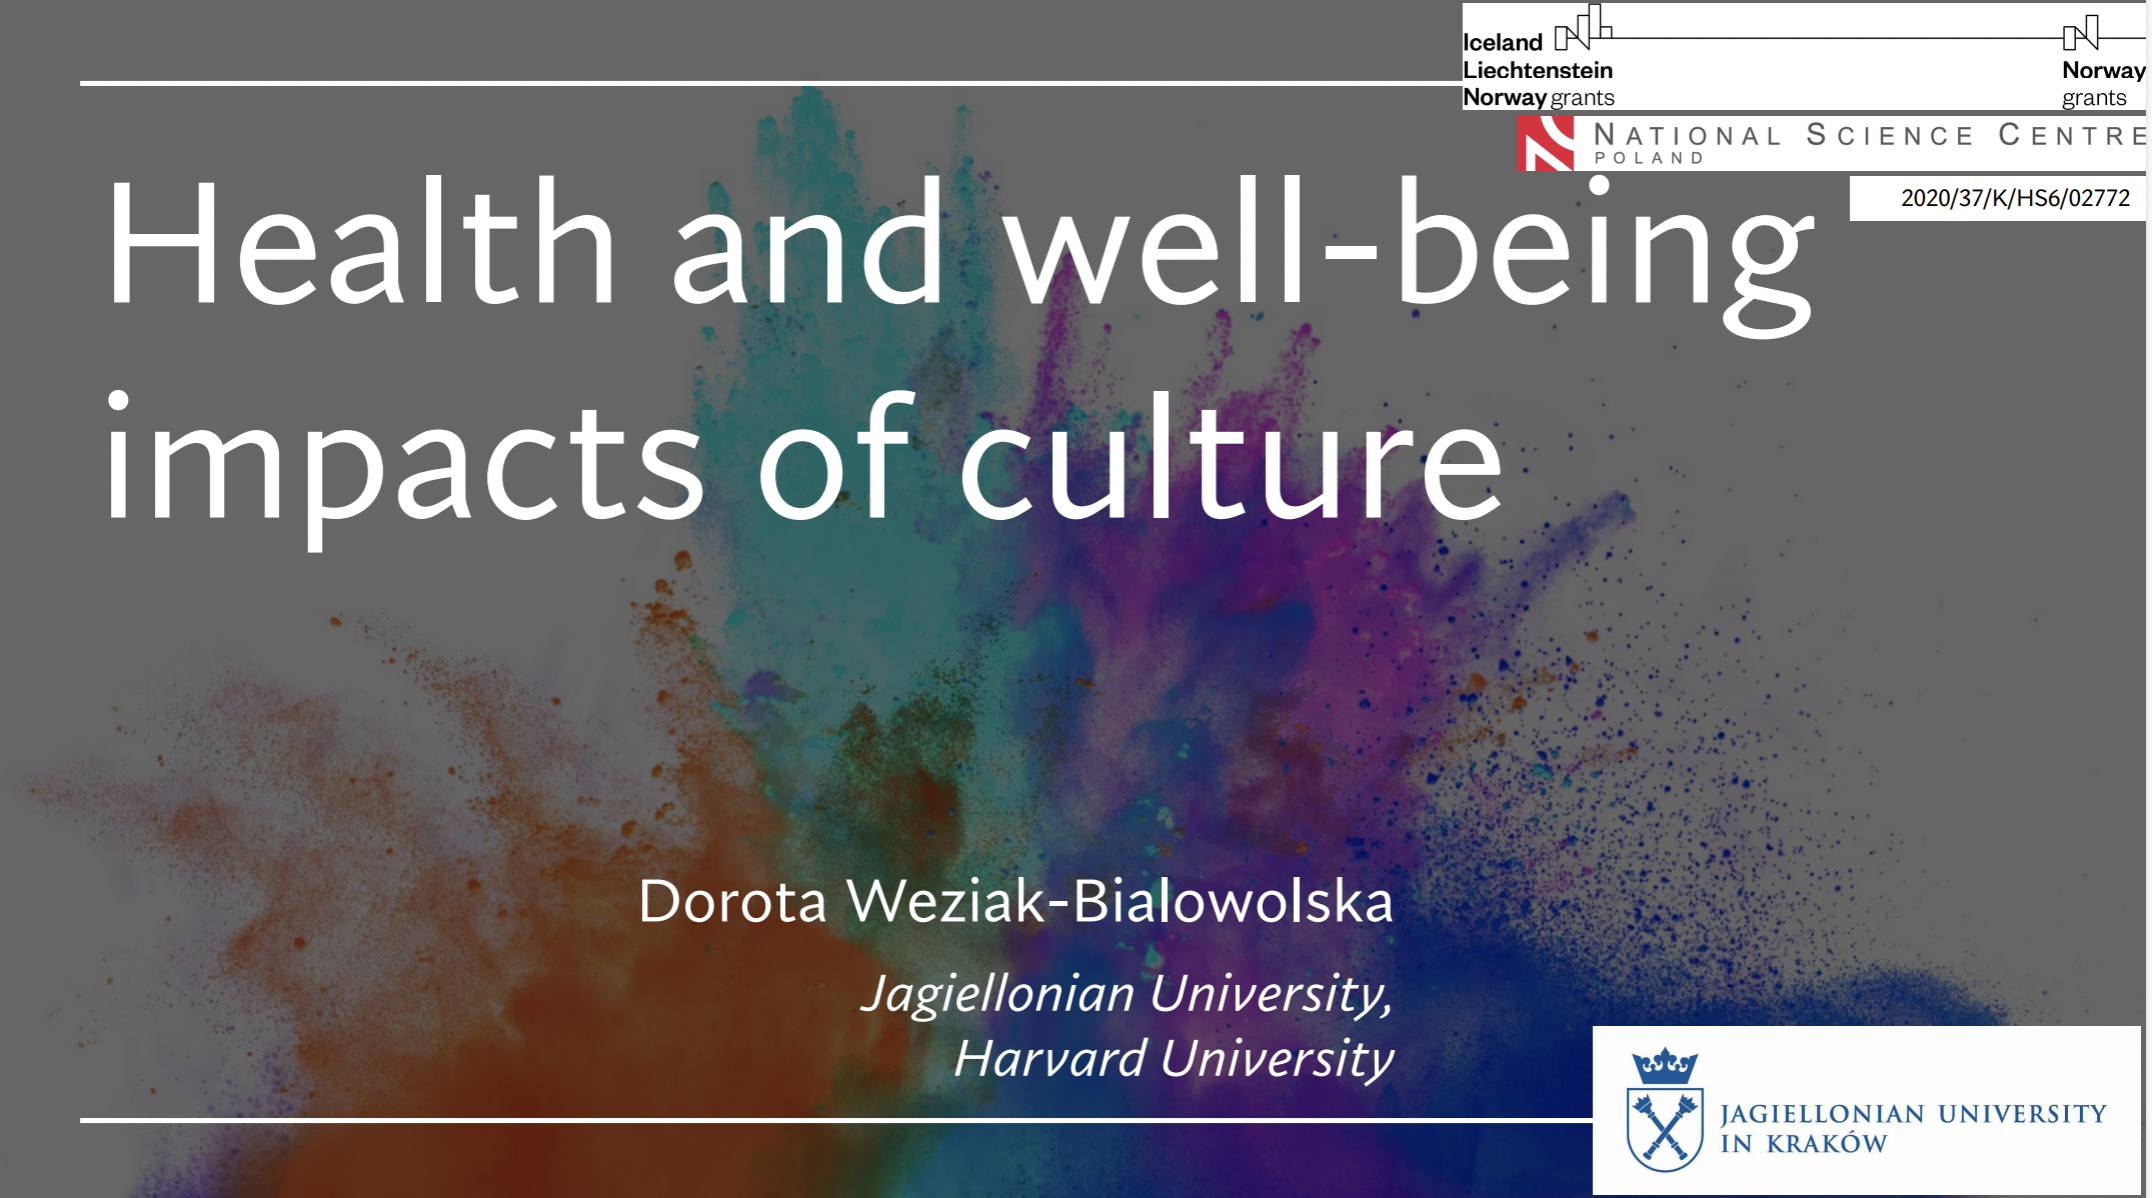 Health and well - being impacts of culture screen prezentacji